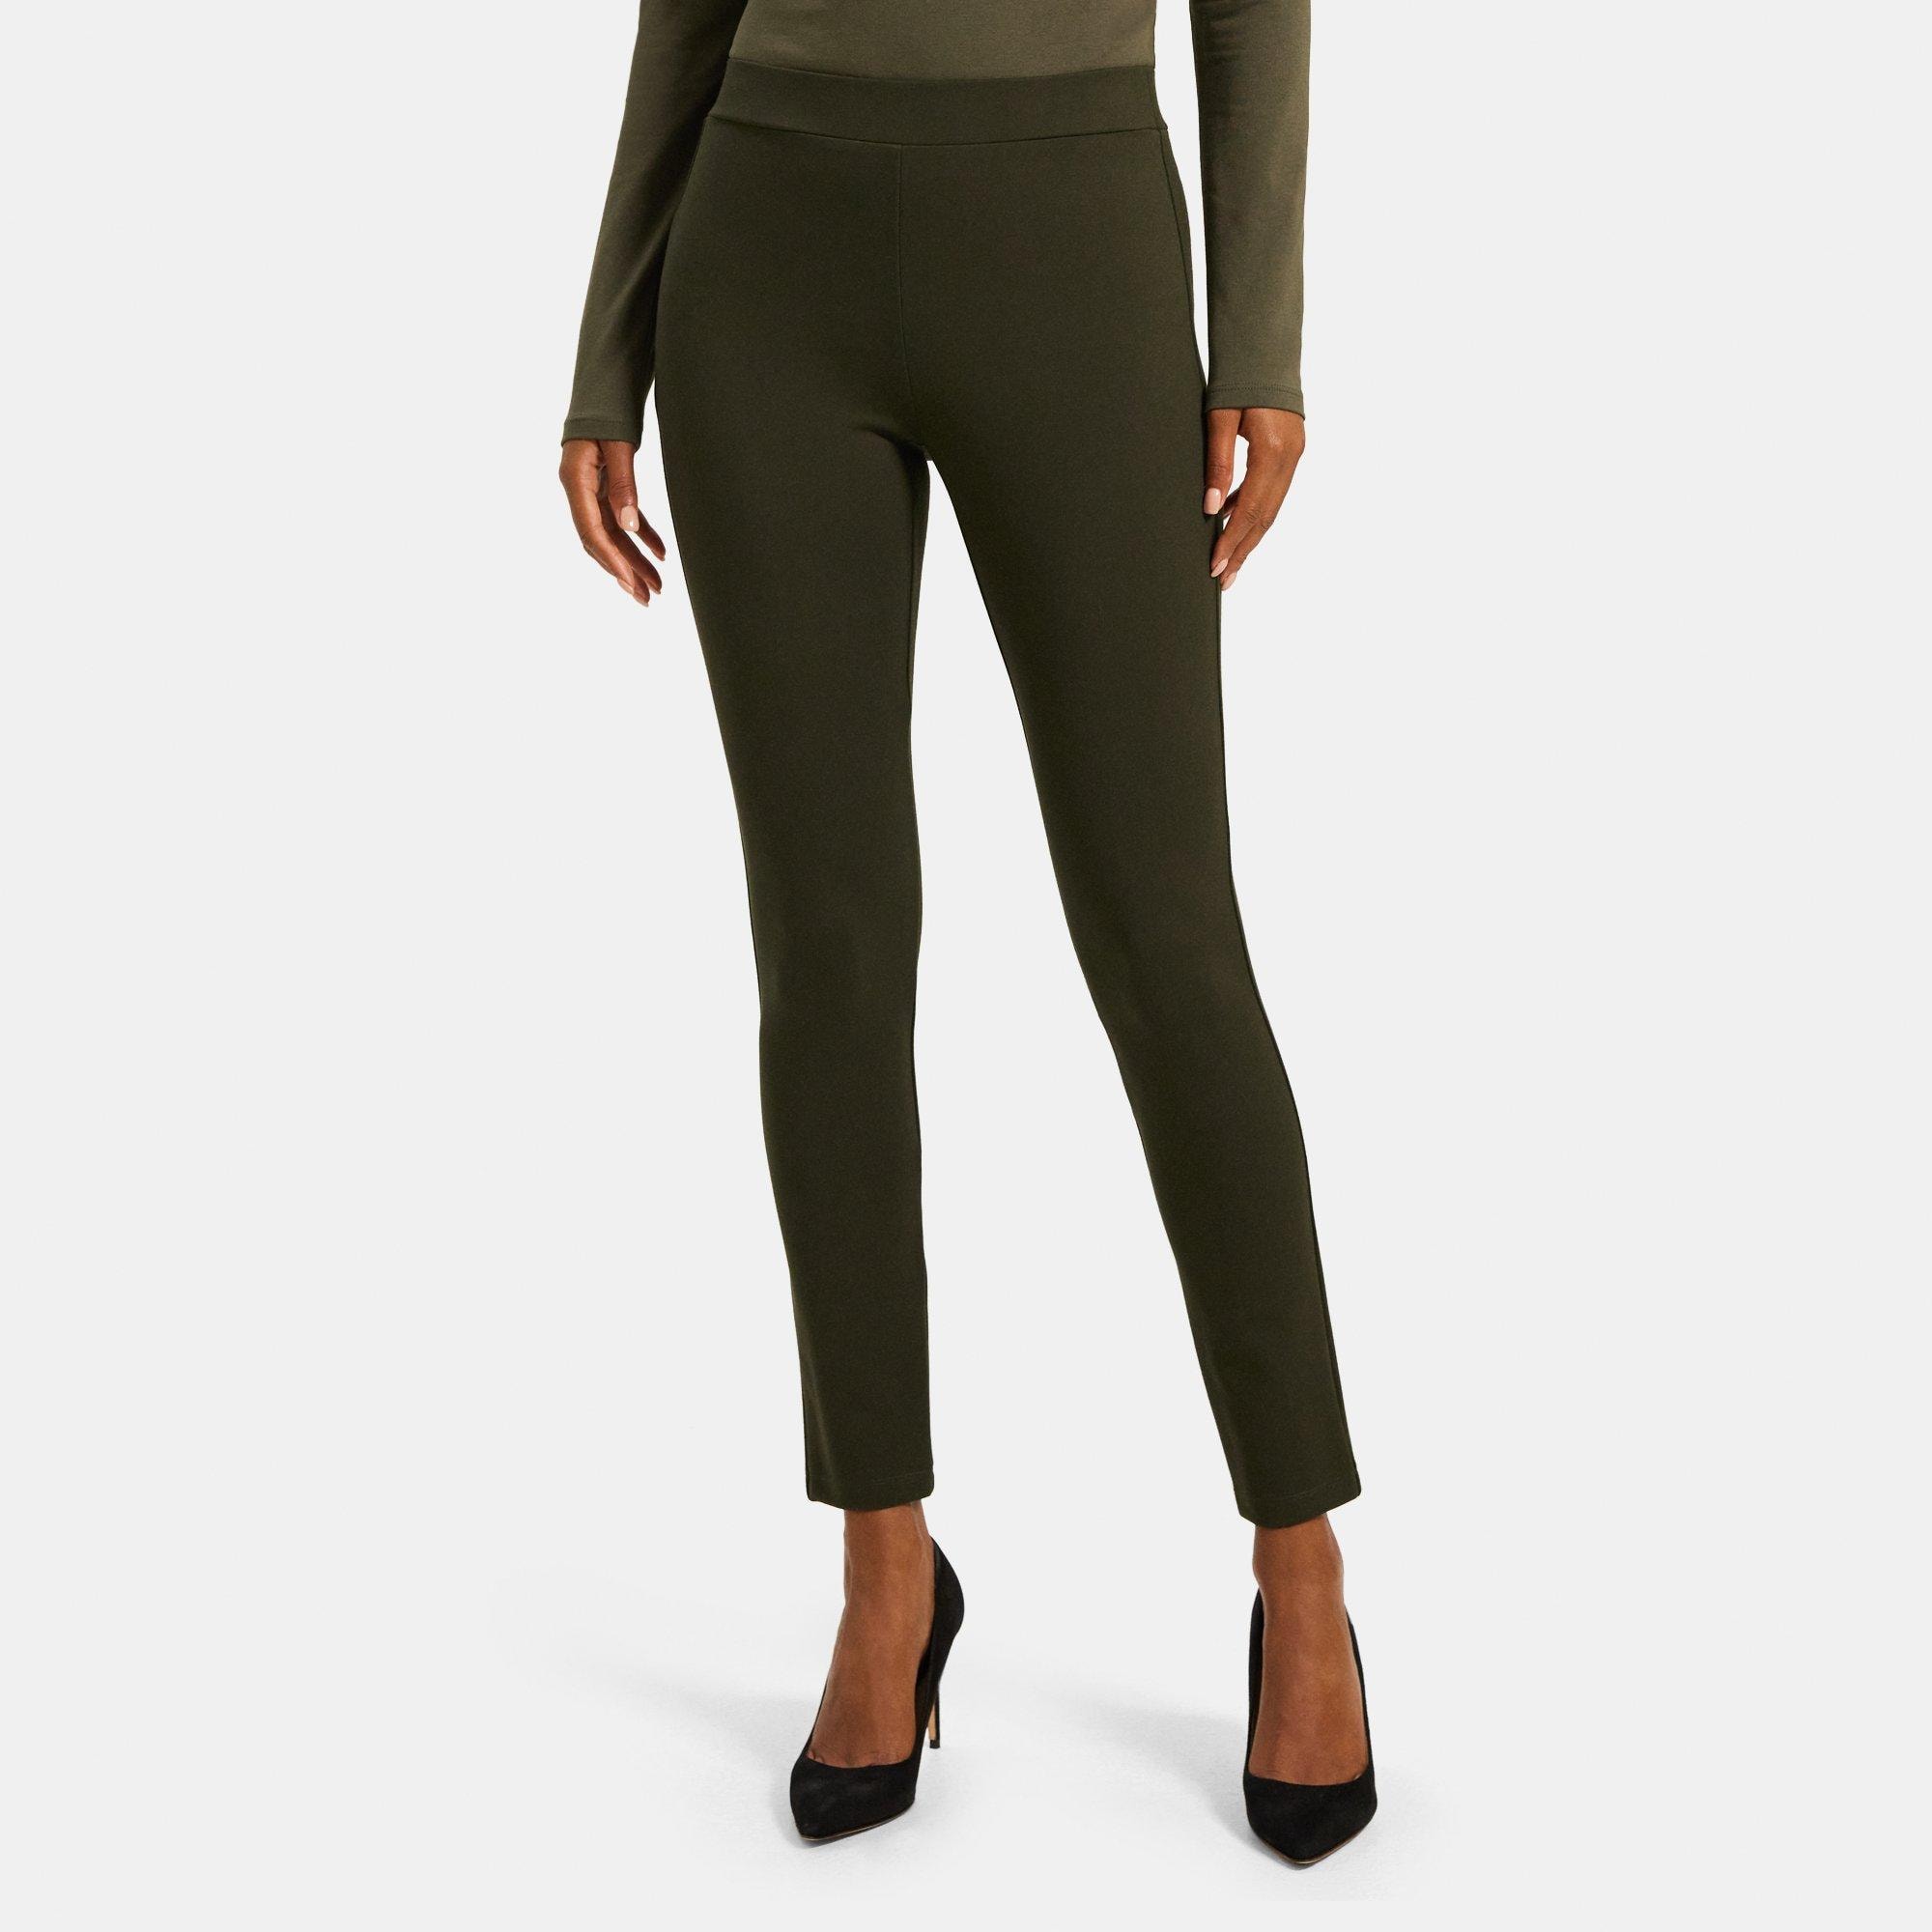 Refined Ponte Legging - Talbots - Our stretch ponte knit leggings allow you  to go about your daily routin…